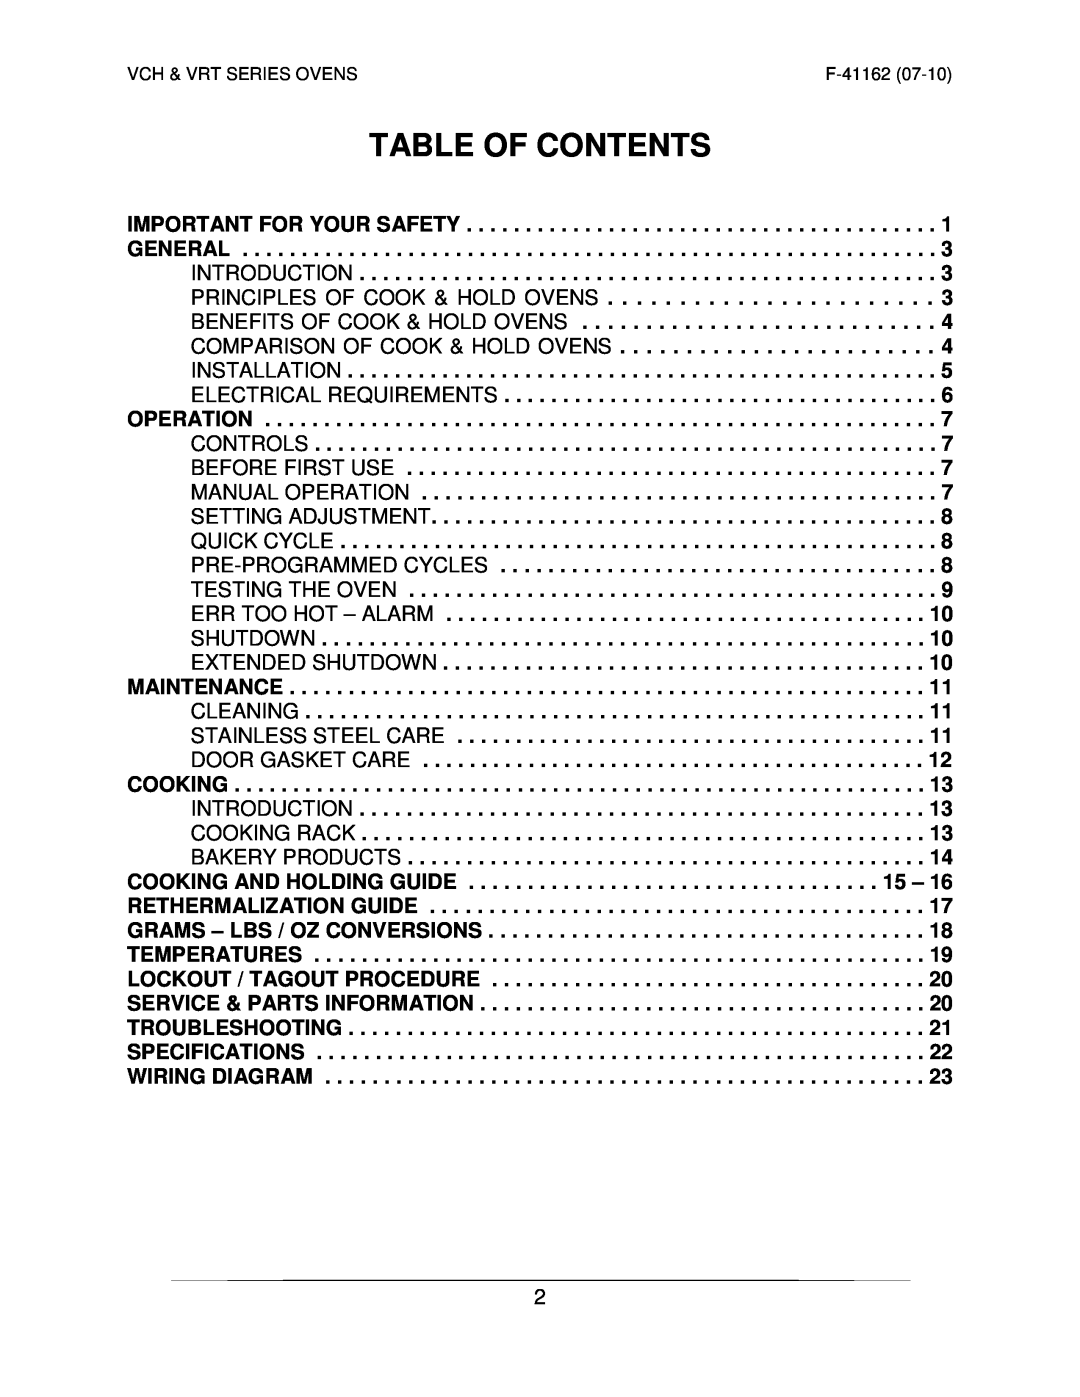 Vulcan-Hart VRT SERIES operation manual Table Of Contents 